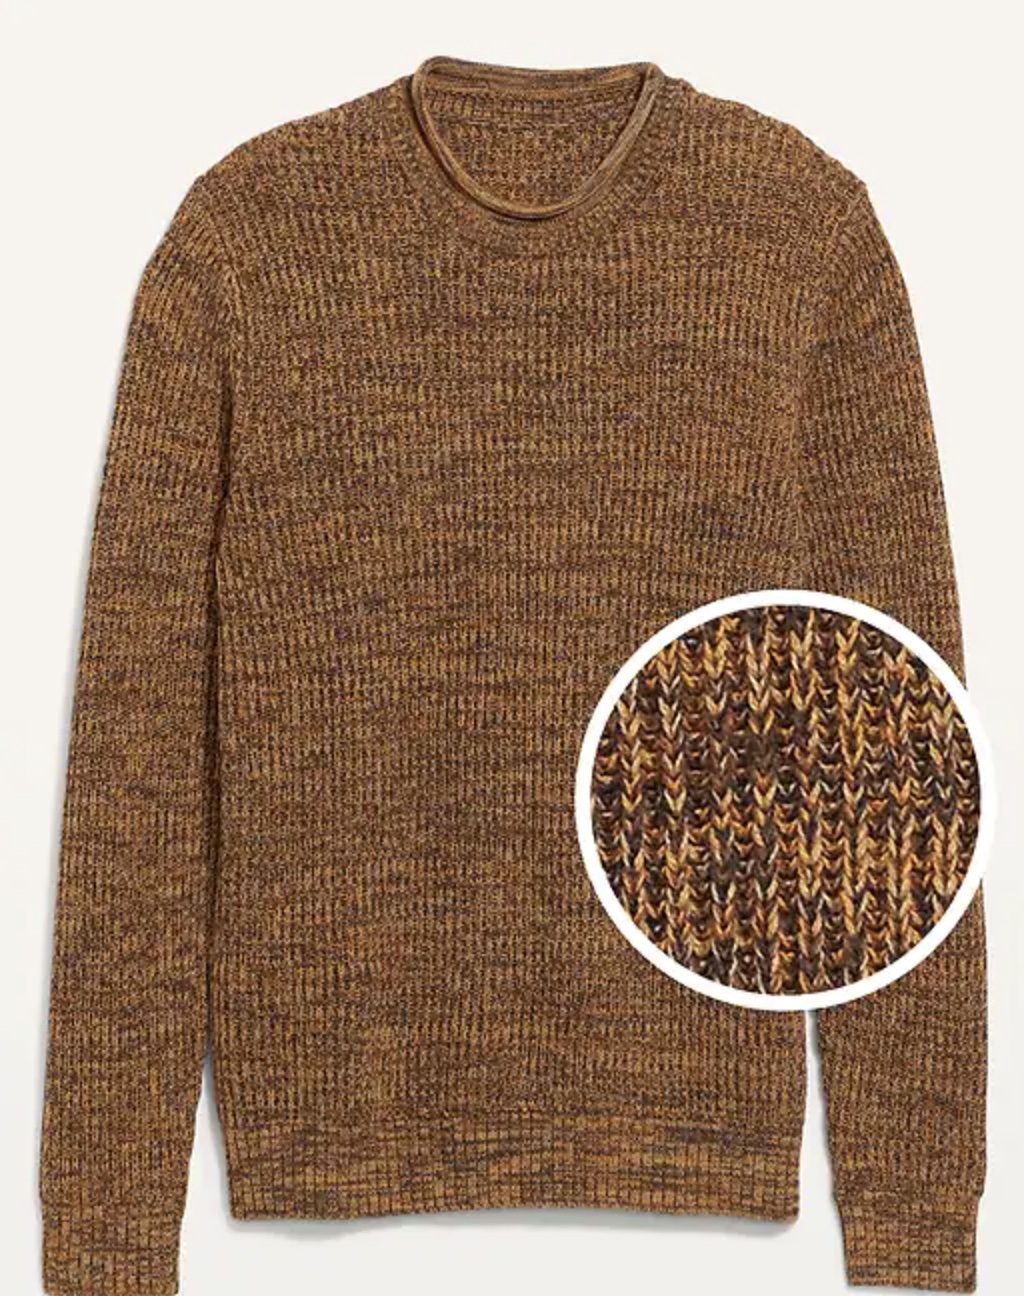 Old Navy roll neck sweater.